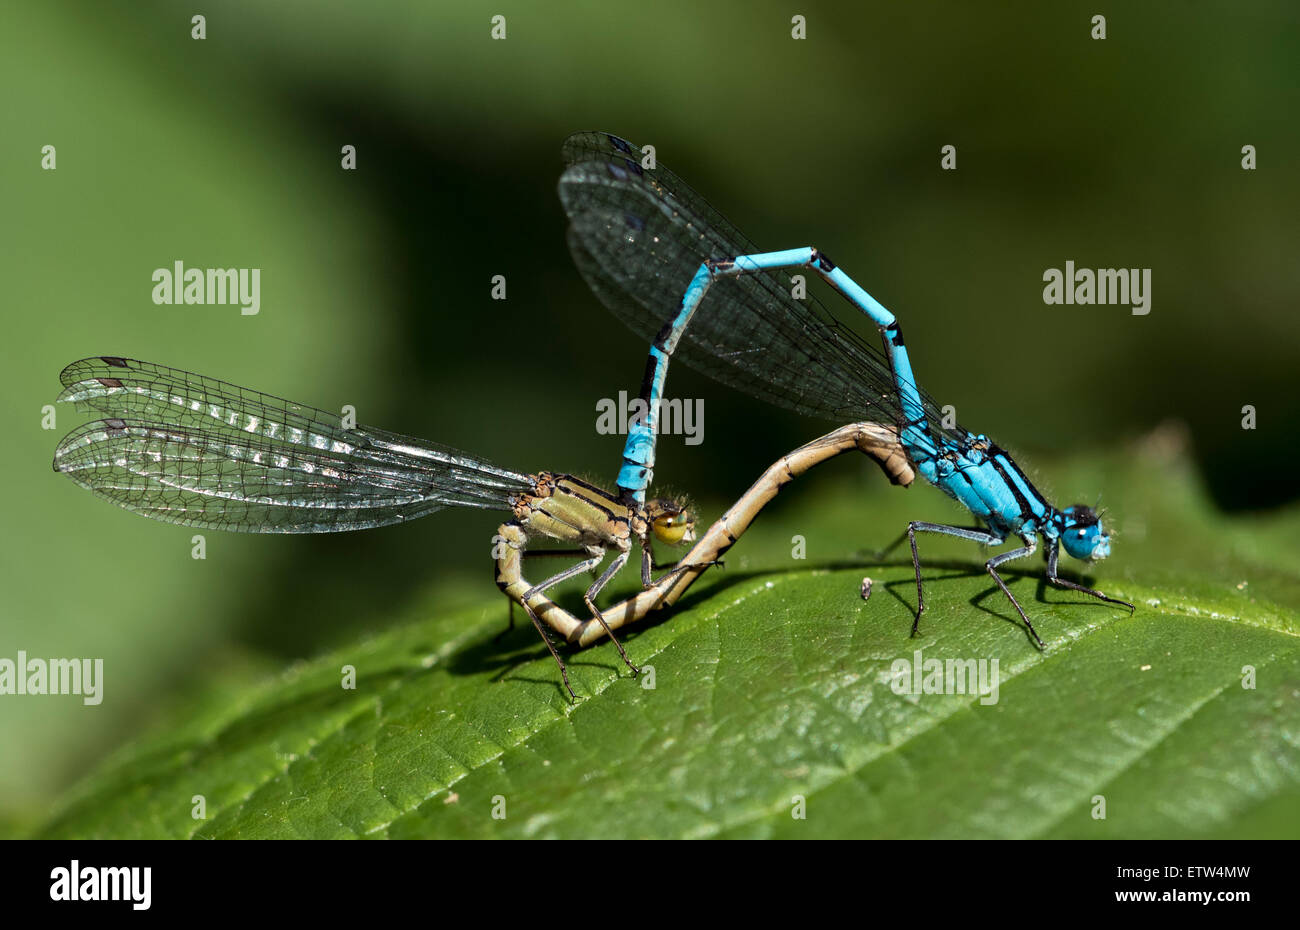 A mating pair of common blue damselflies on a green leaf Stock Photo